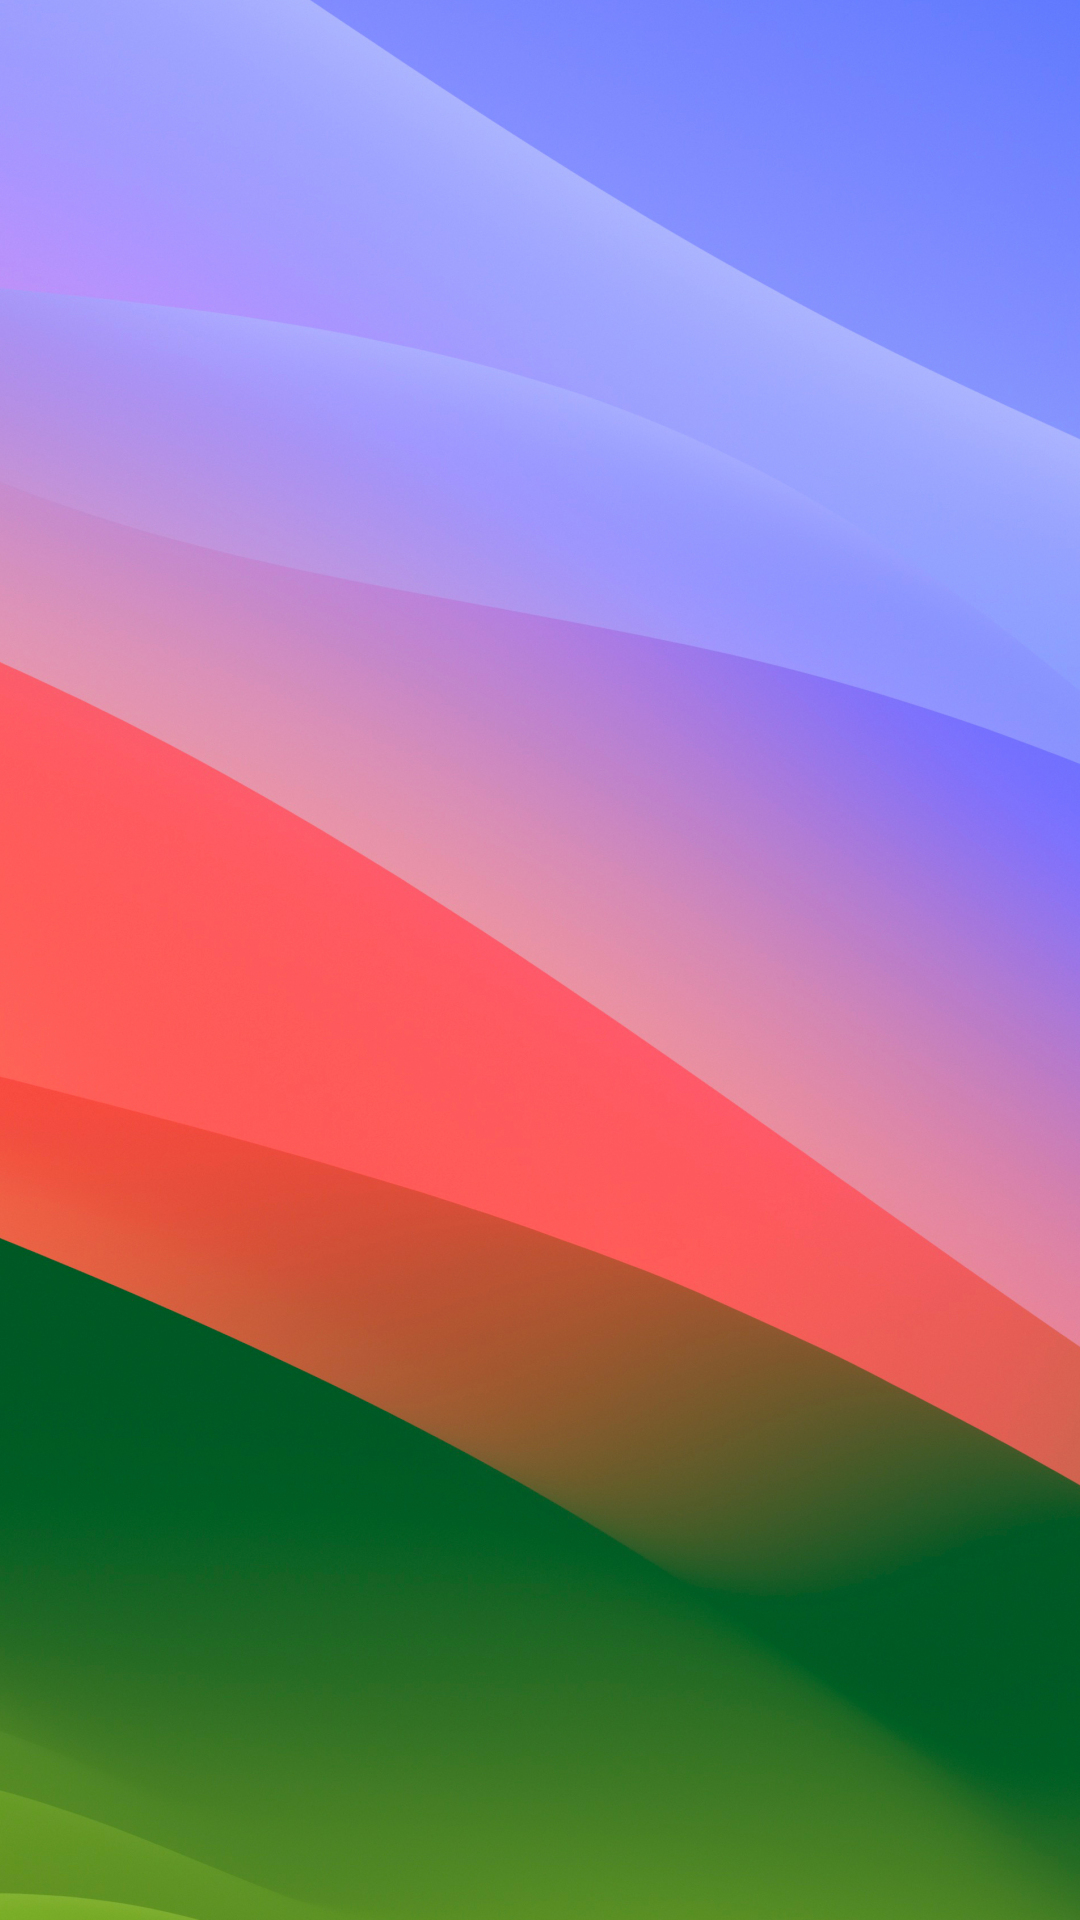 MacOS Sonoma, colorful waves, stock photo, 1080x1920 wallpaper